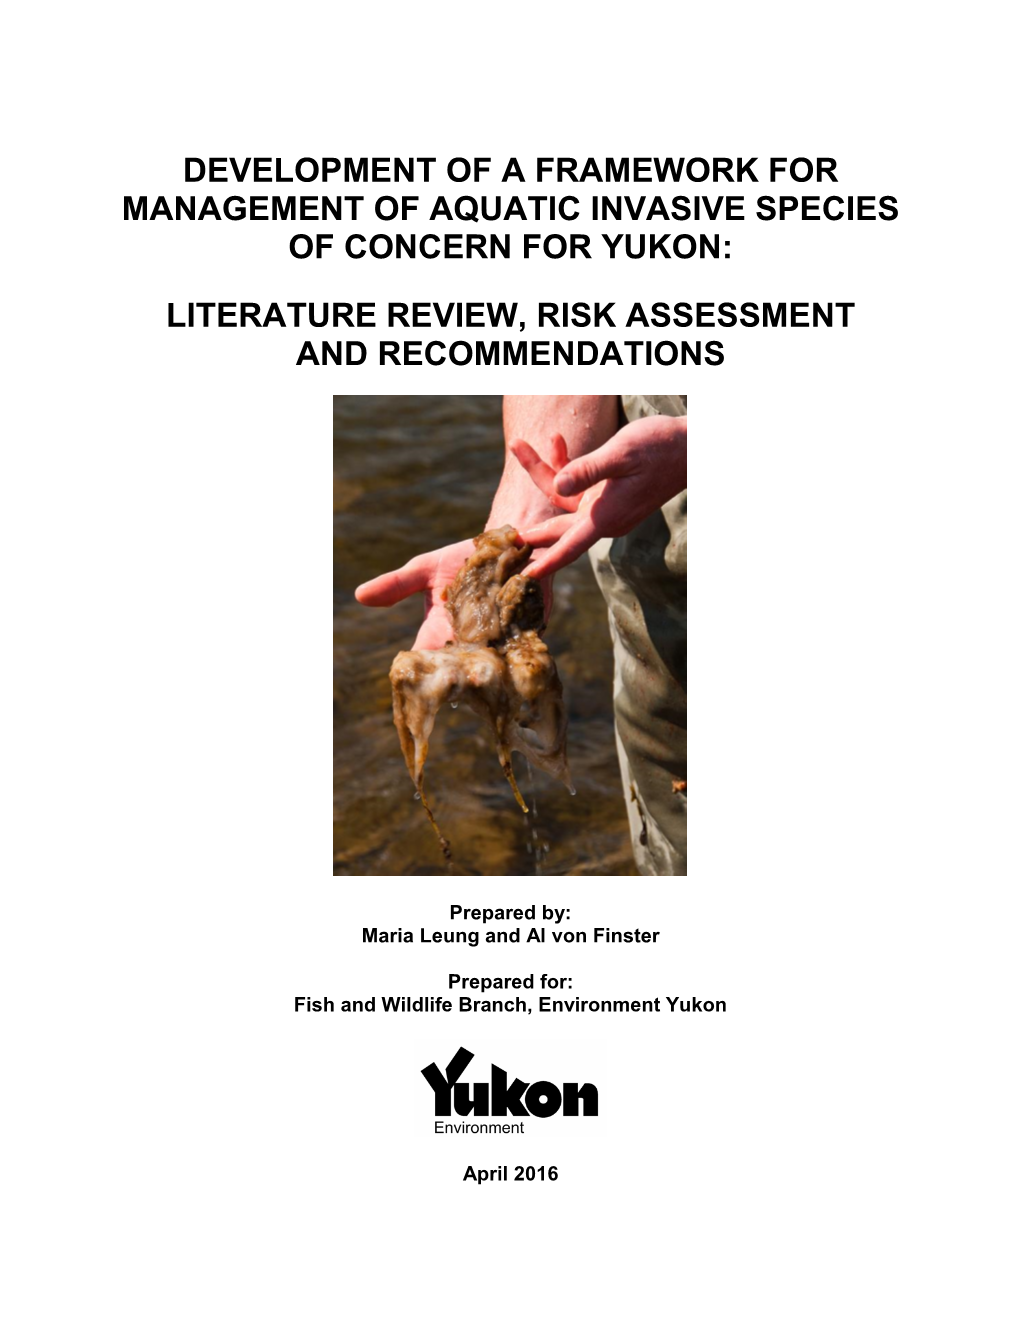 Development of a Framework for Management of Aquatic Invasive Species of Concern for Yukon: Literature Review, Risk Assessment and Recommendations